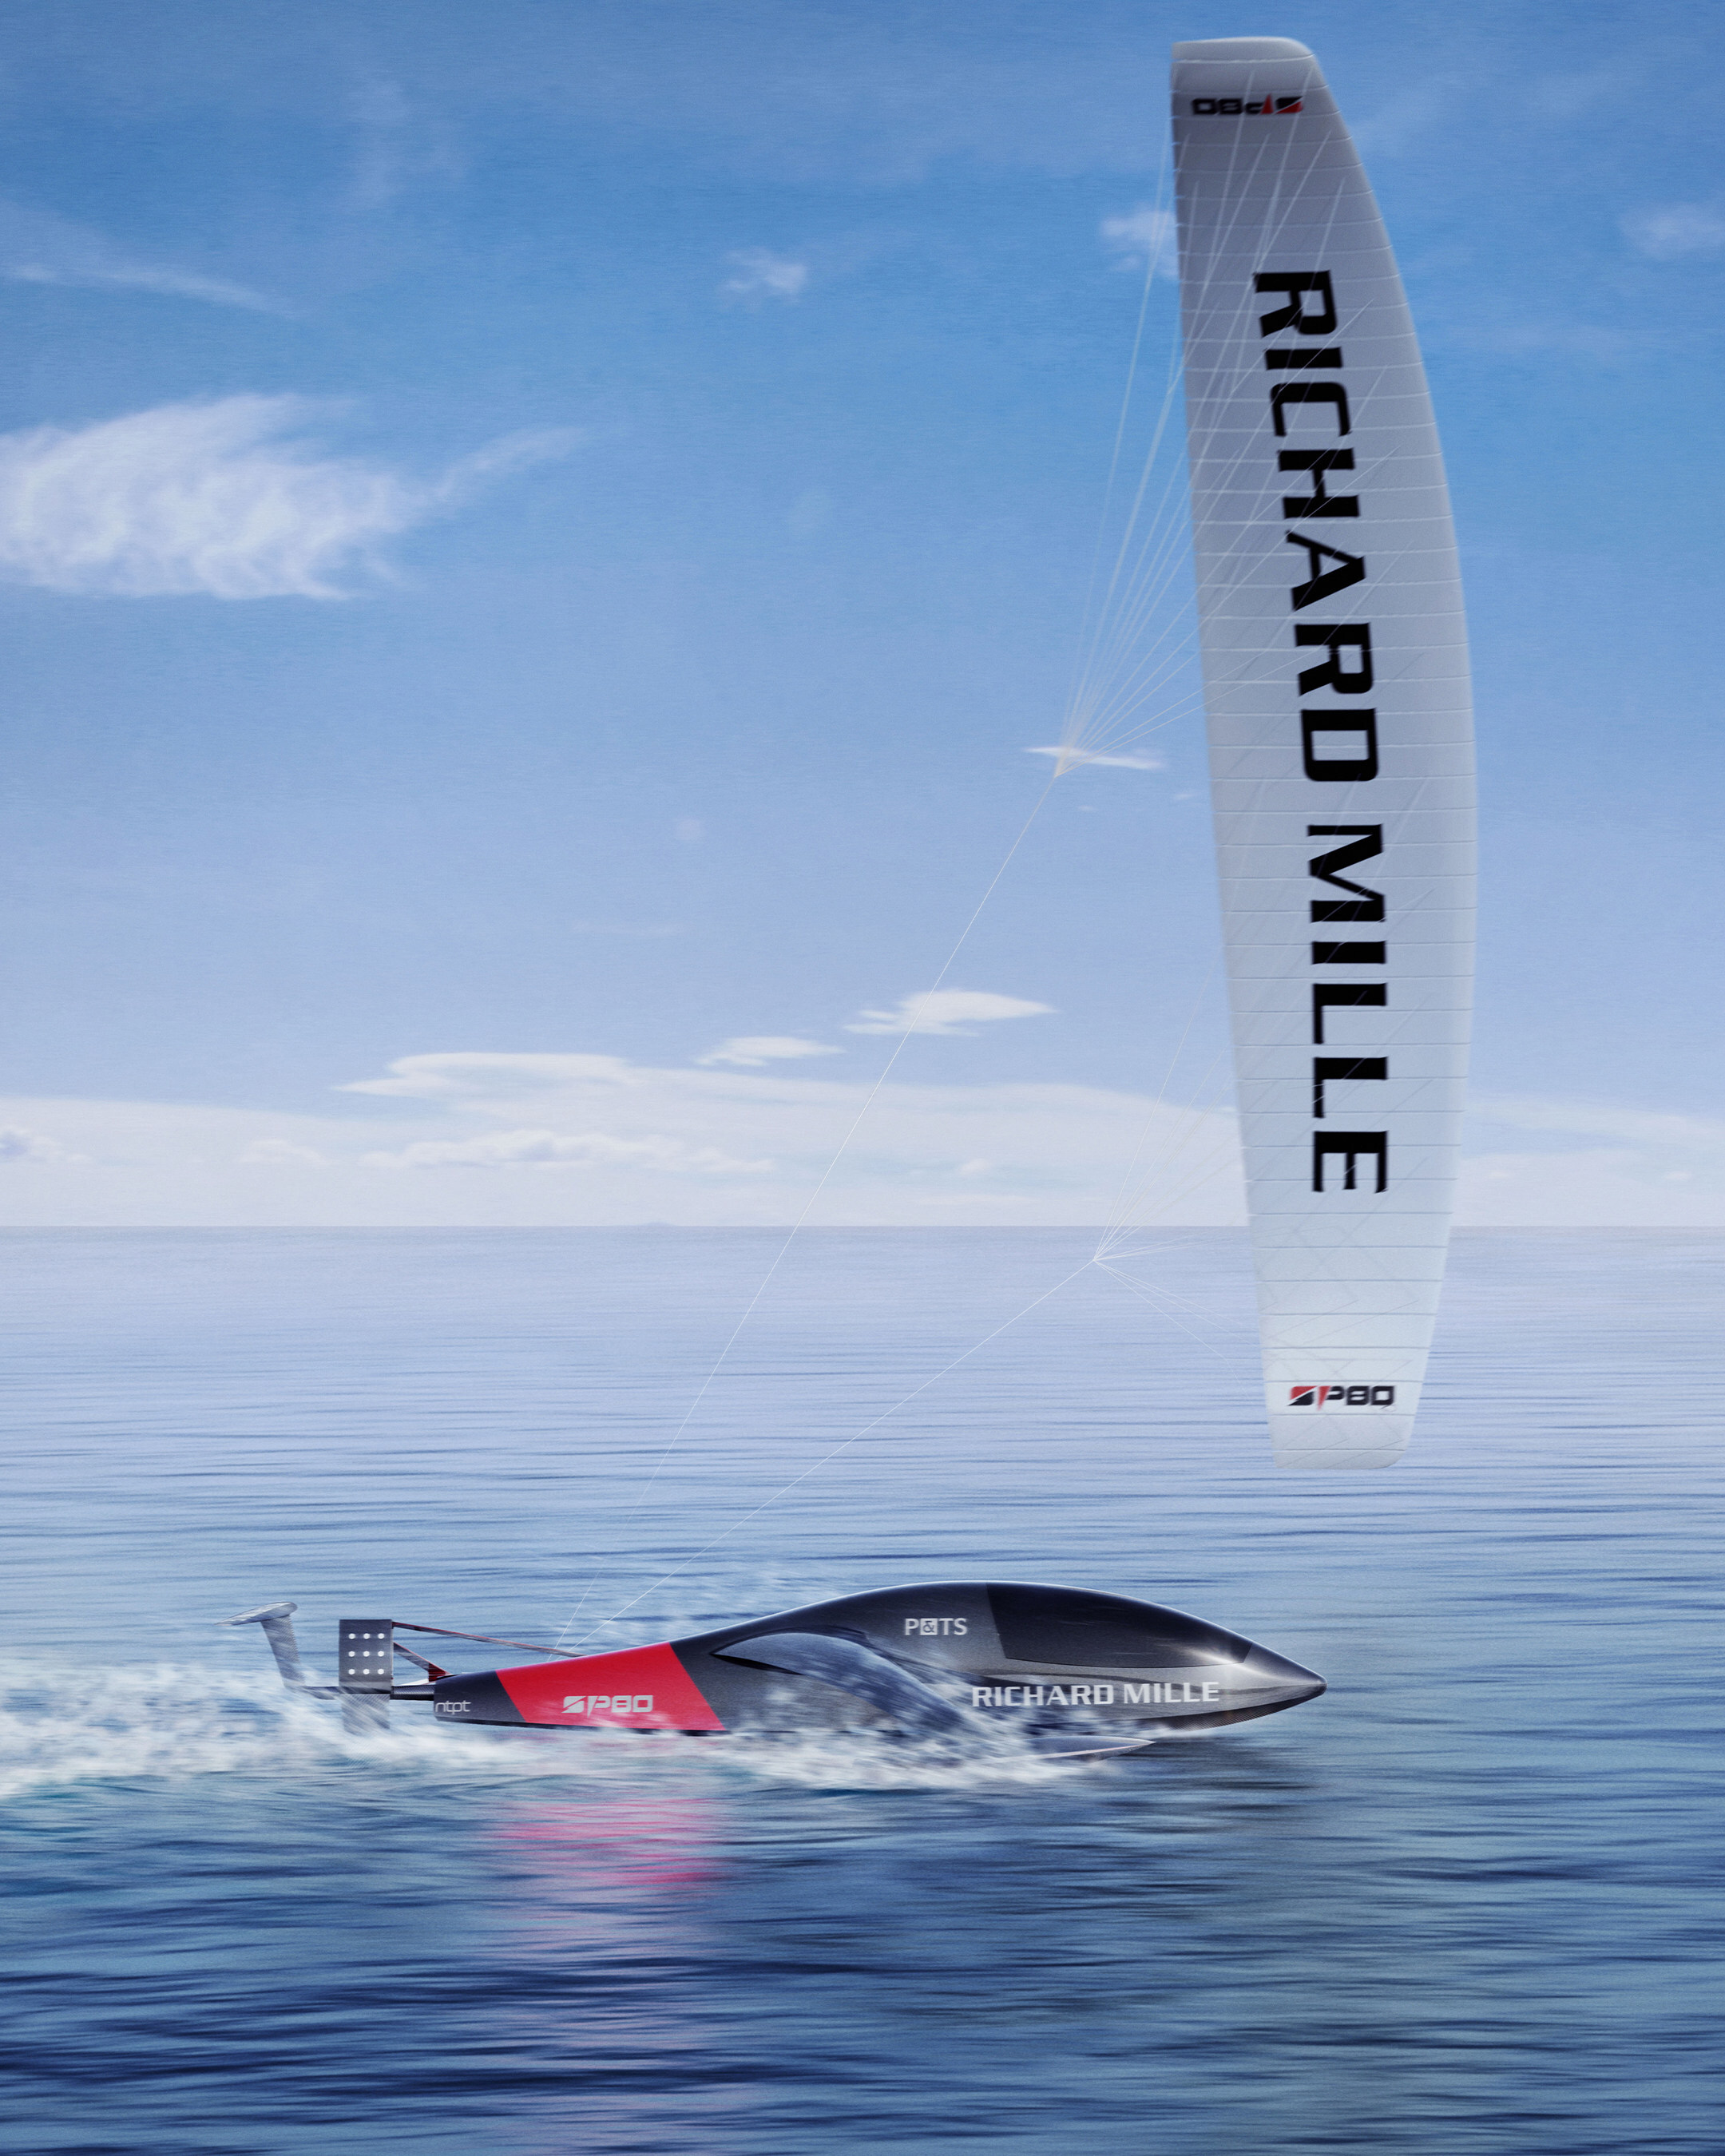 Watchmaker Richard Mille has partnered with Switzerland’s SP80 in a bid to break the world sailing speed record. Photo: Richard Mille